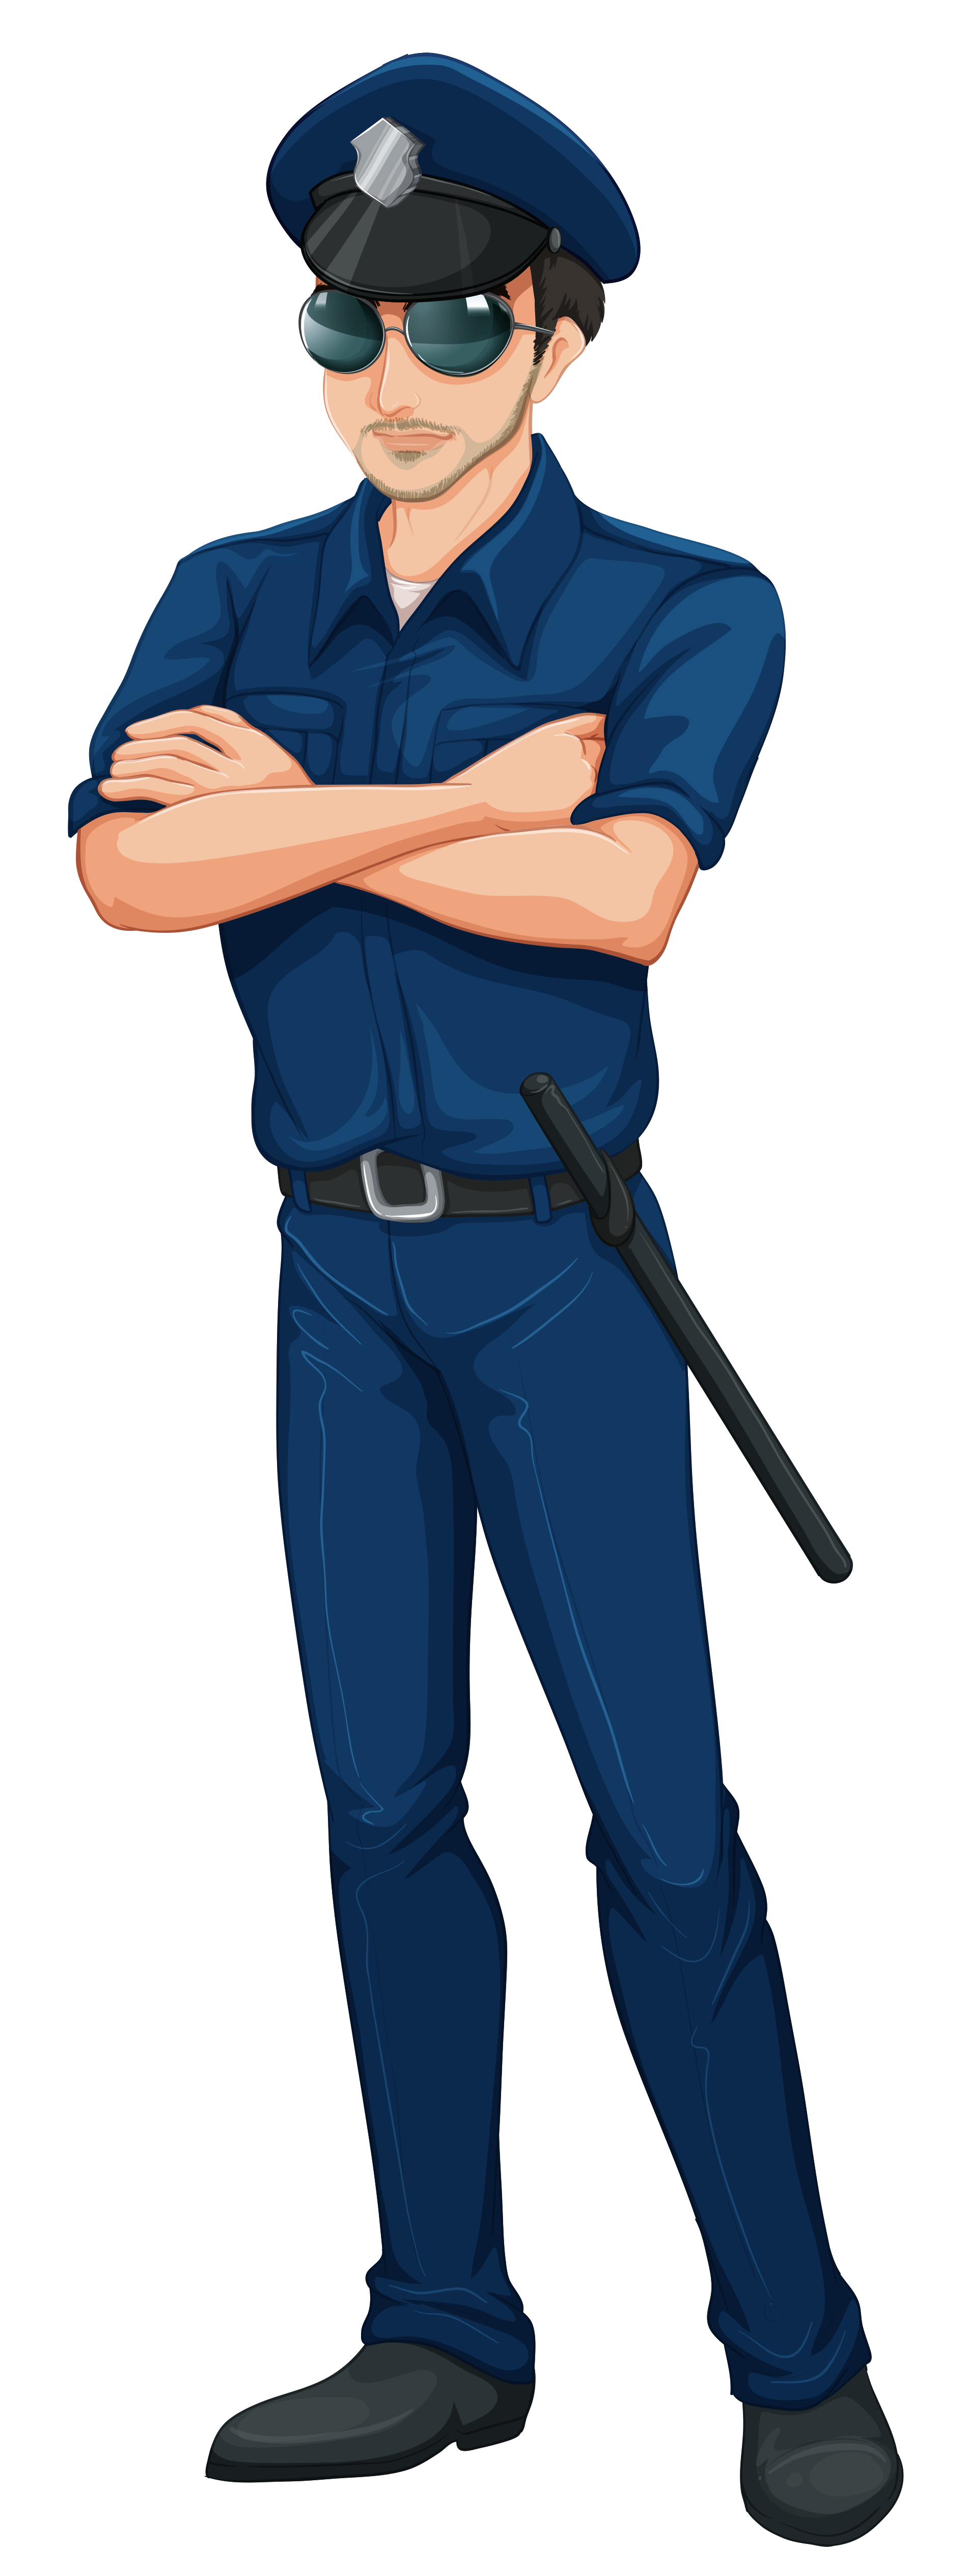 Police Officer Clipart | Clip